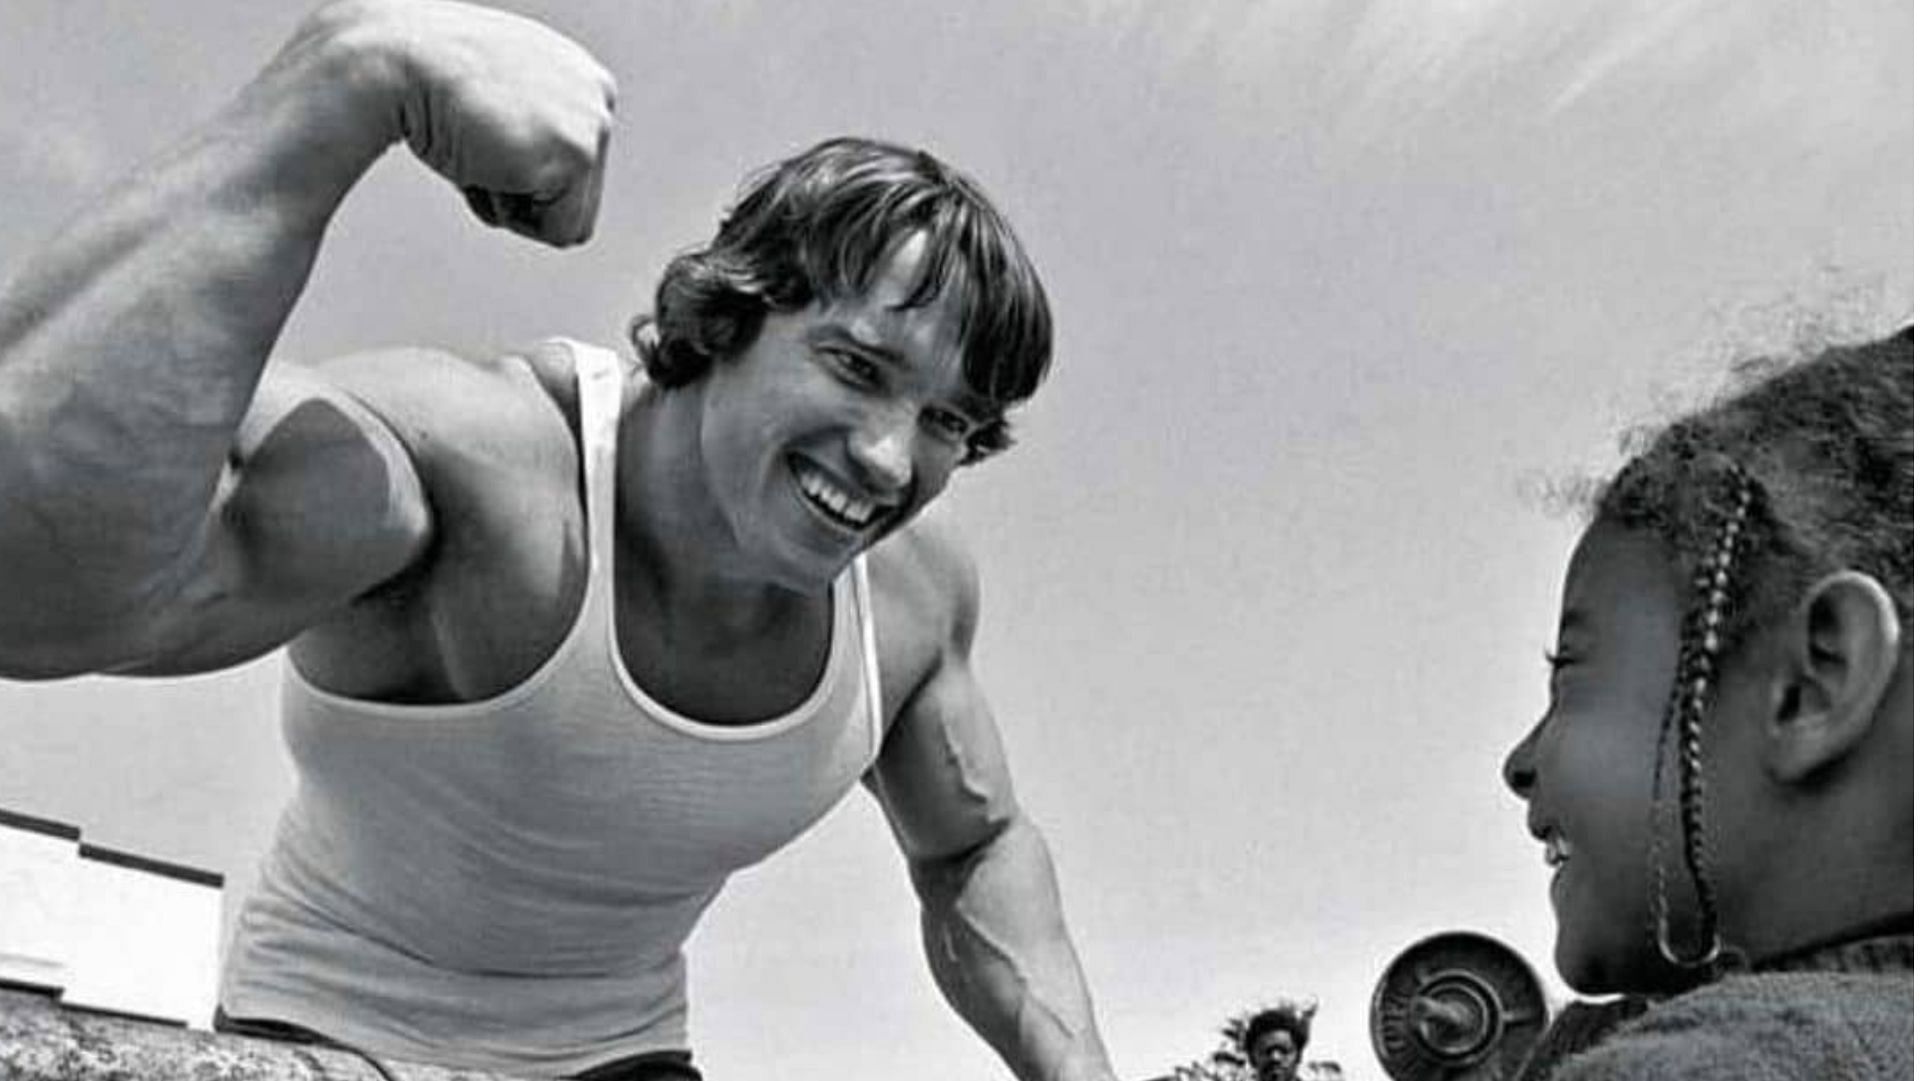 Use these pull day exercises to build a body like Arnold (Image via Instagram@arnold_fans_club)